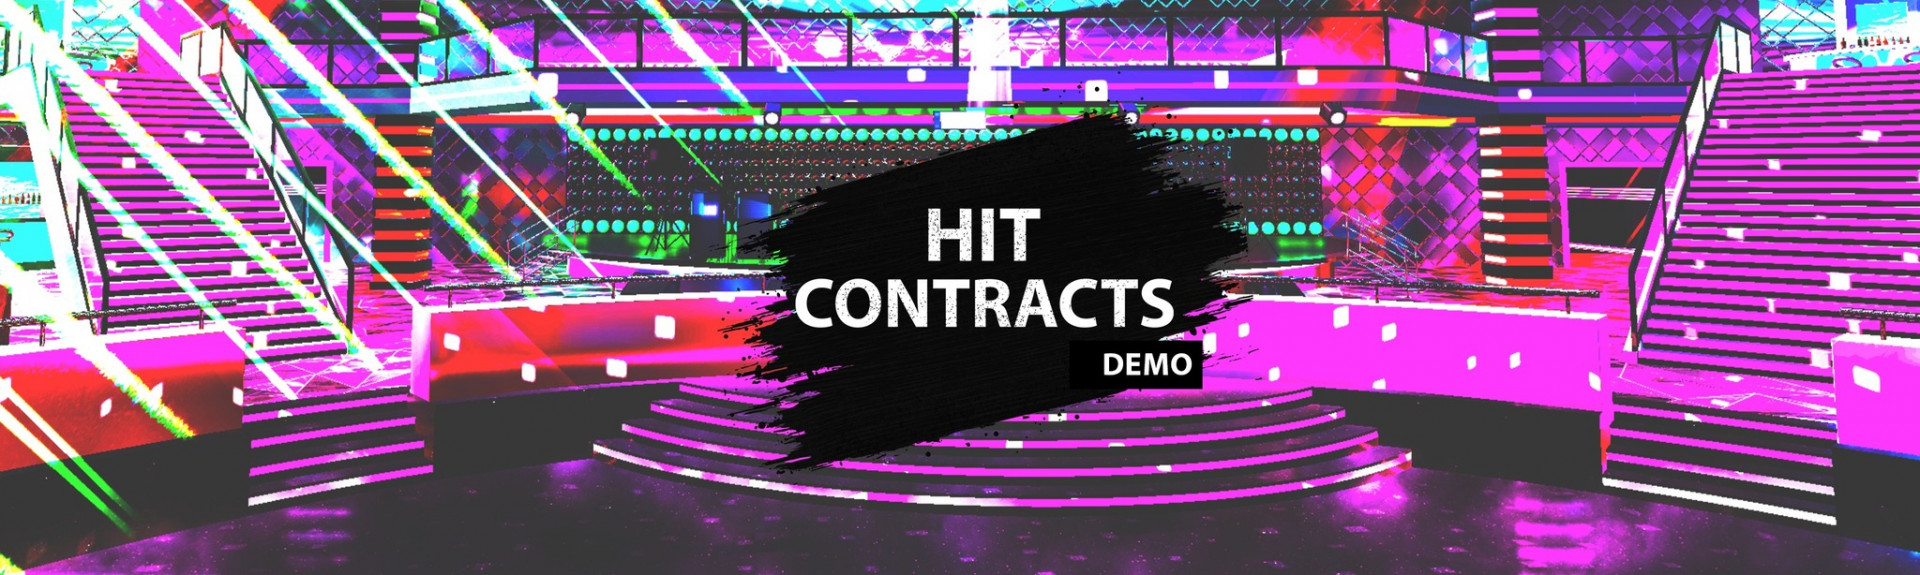 Hit Contracts VR - Free Demo